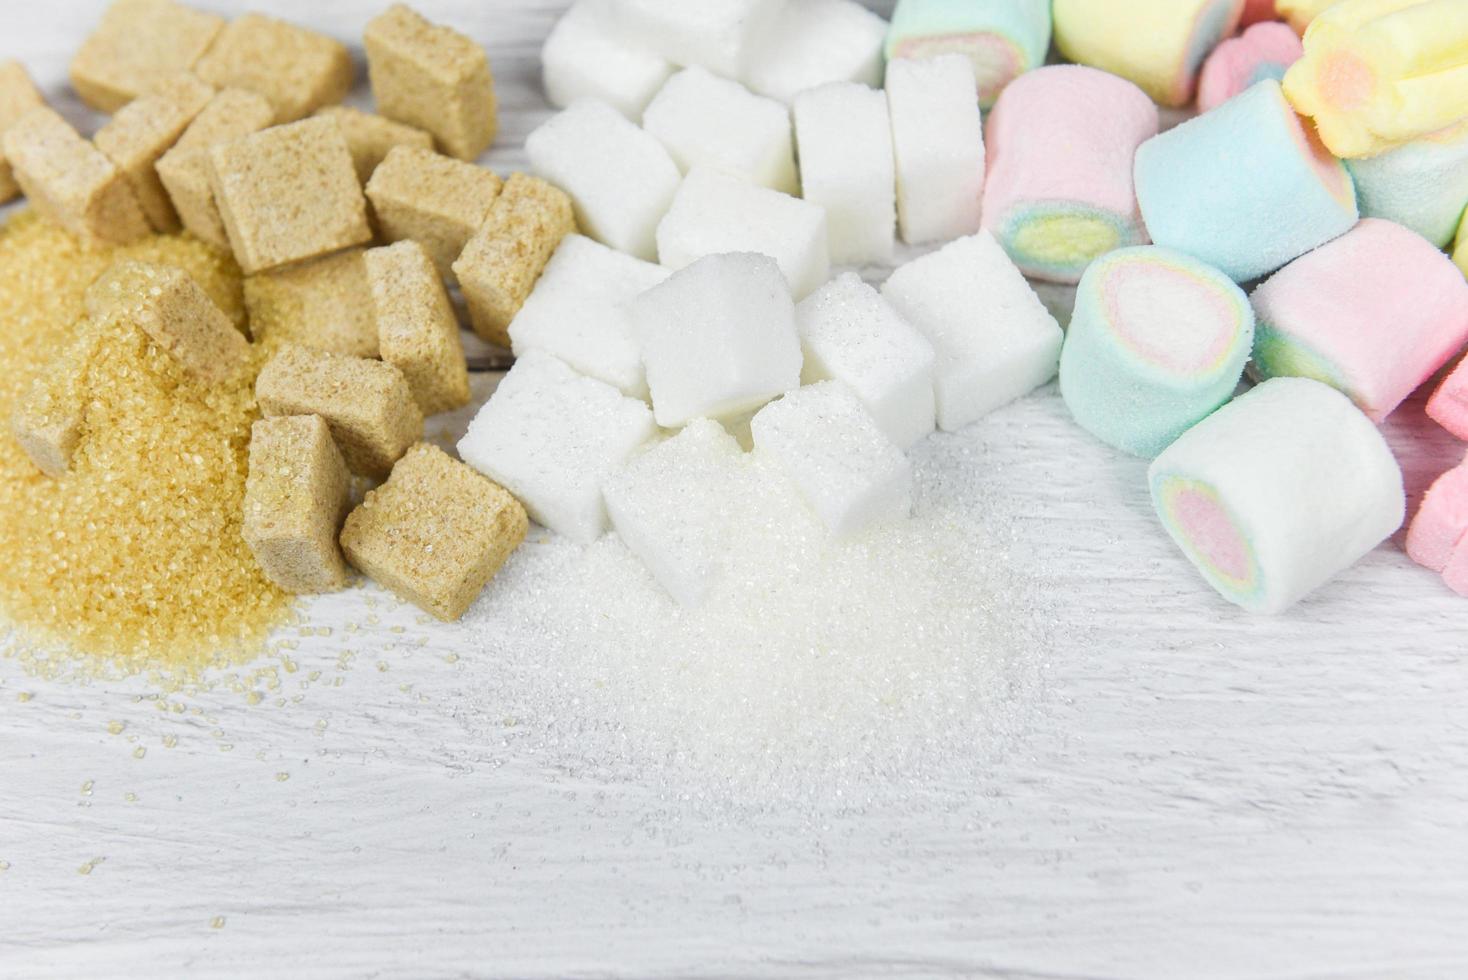 Brown sugar , White sugar , sugar cubes and colorful candy sweet on the table background No sugar in diet causes obesity diabetes and other health problems photo